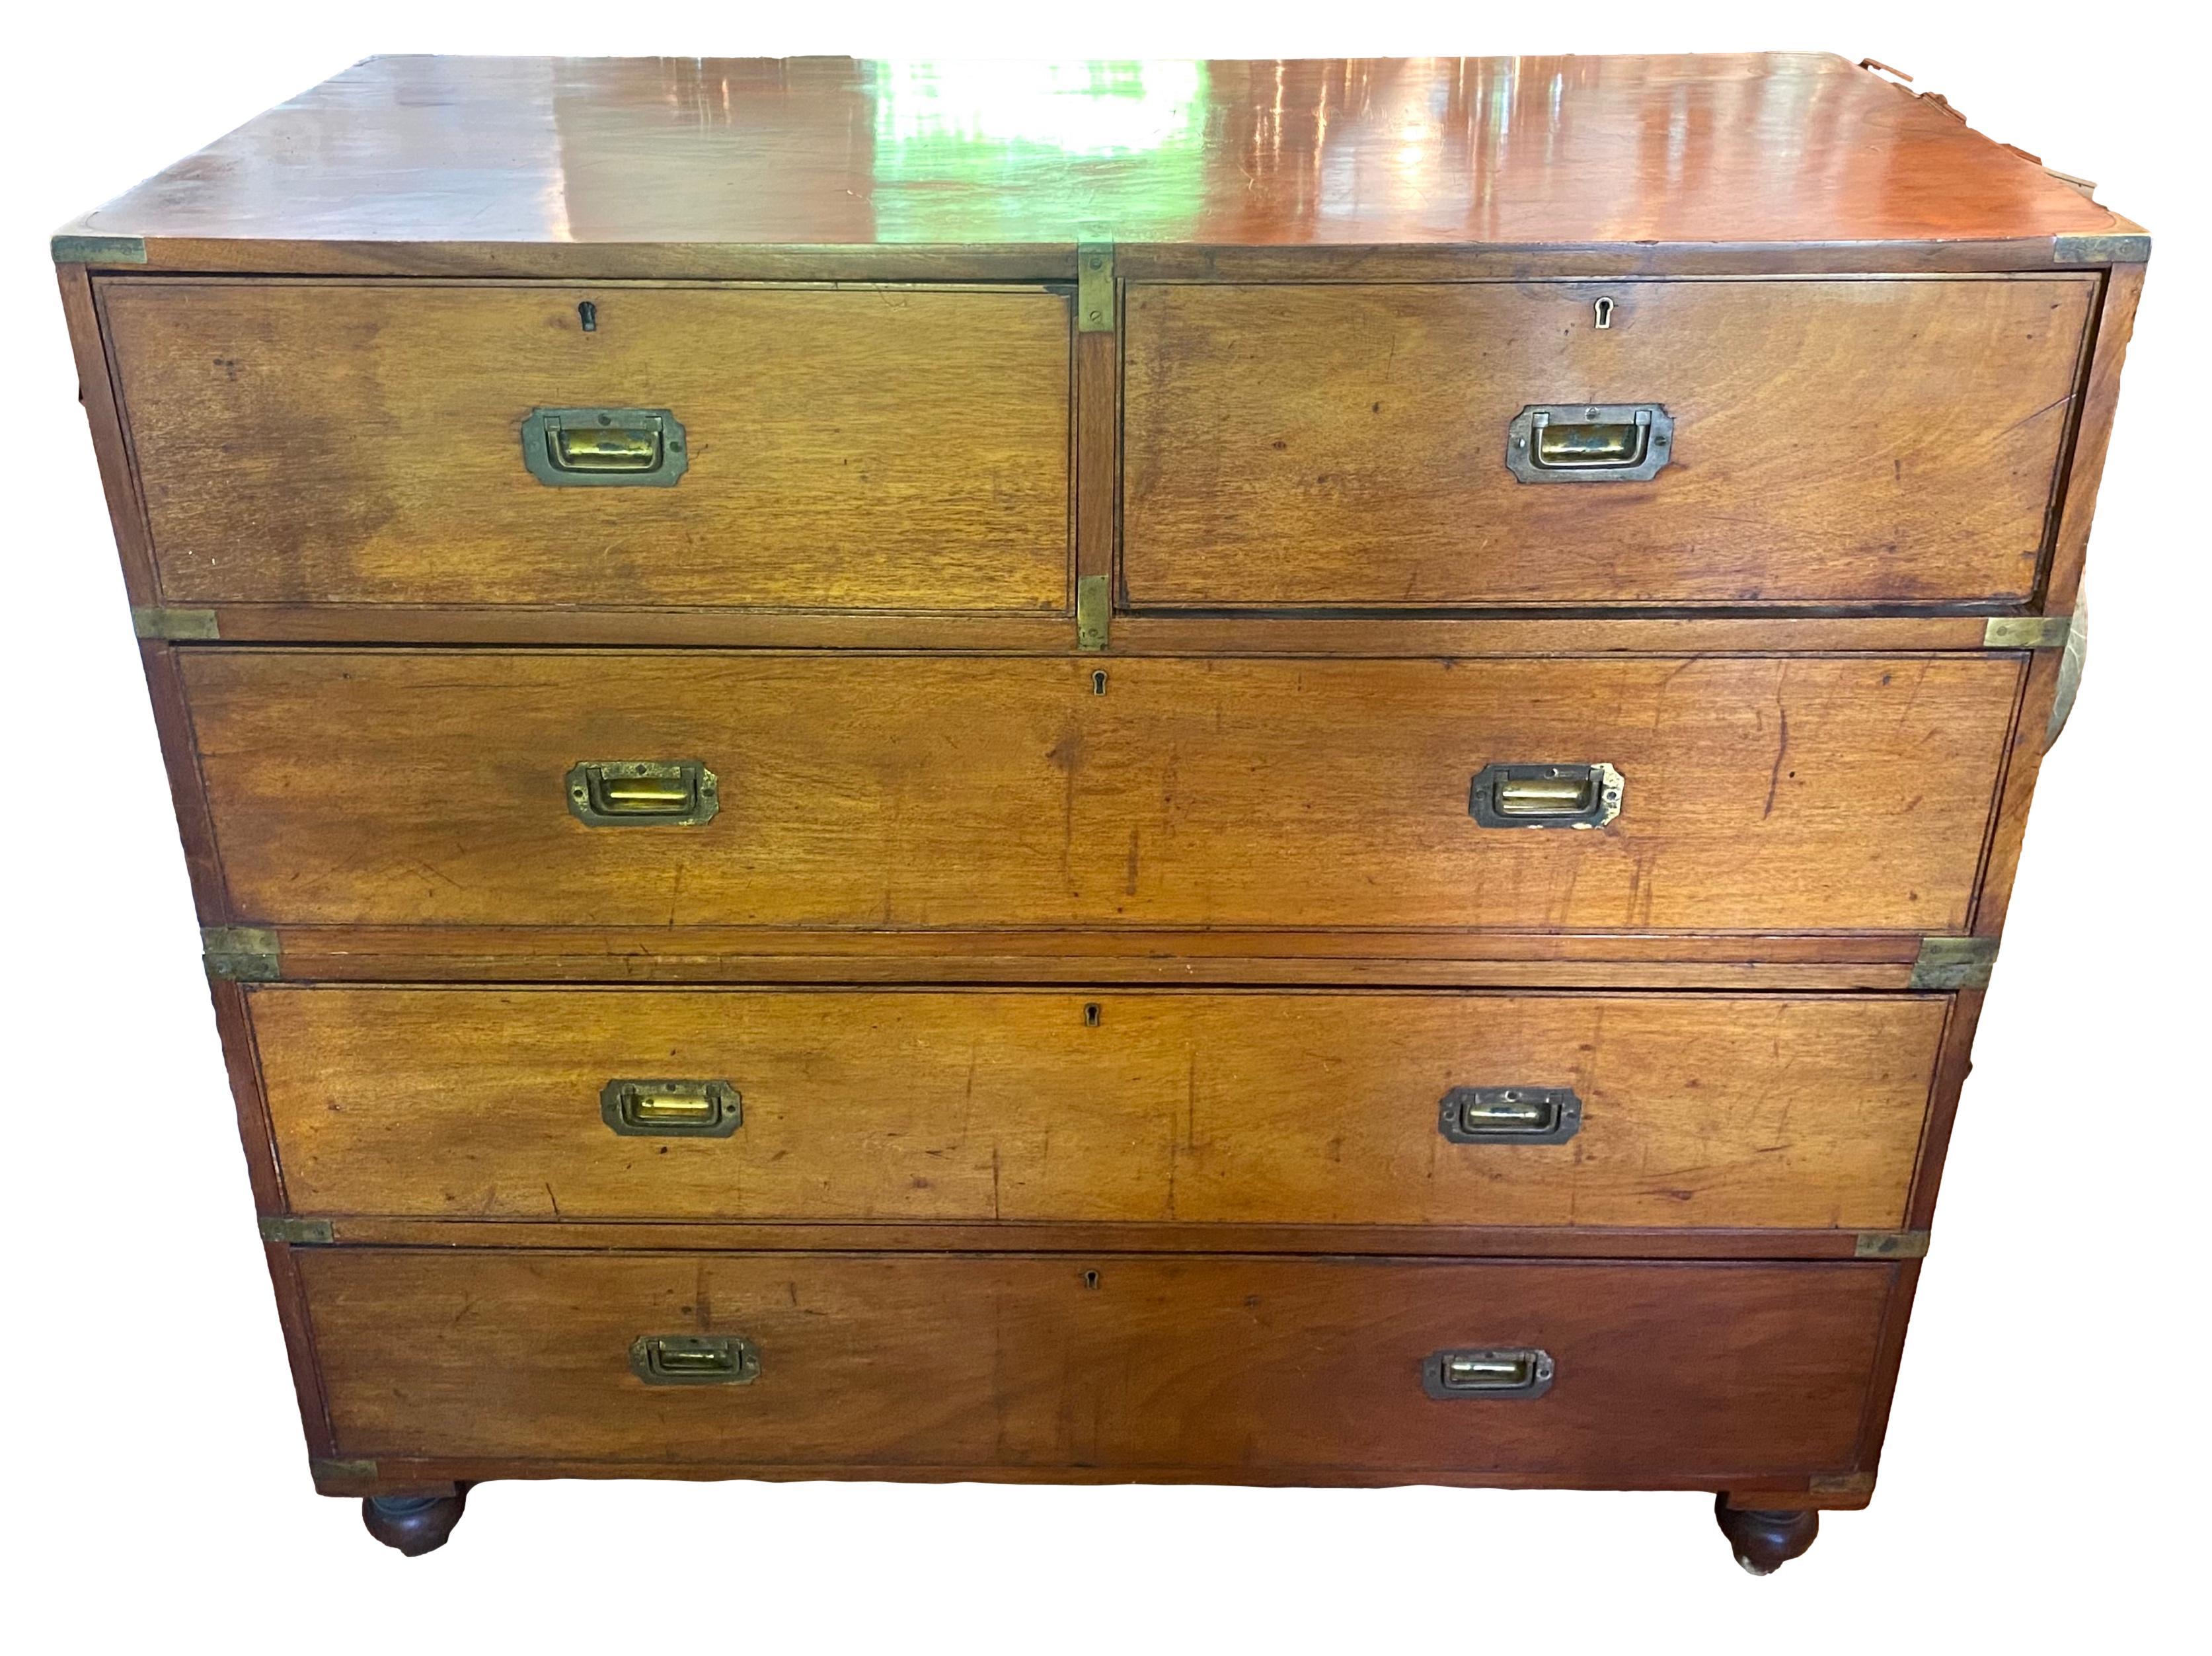 Large 19th Century two part antique campaign chest... original hardware with handles on the sides of the each piece.... 